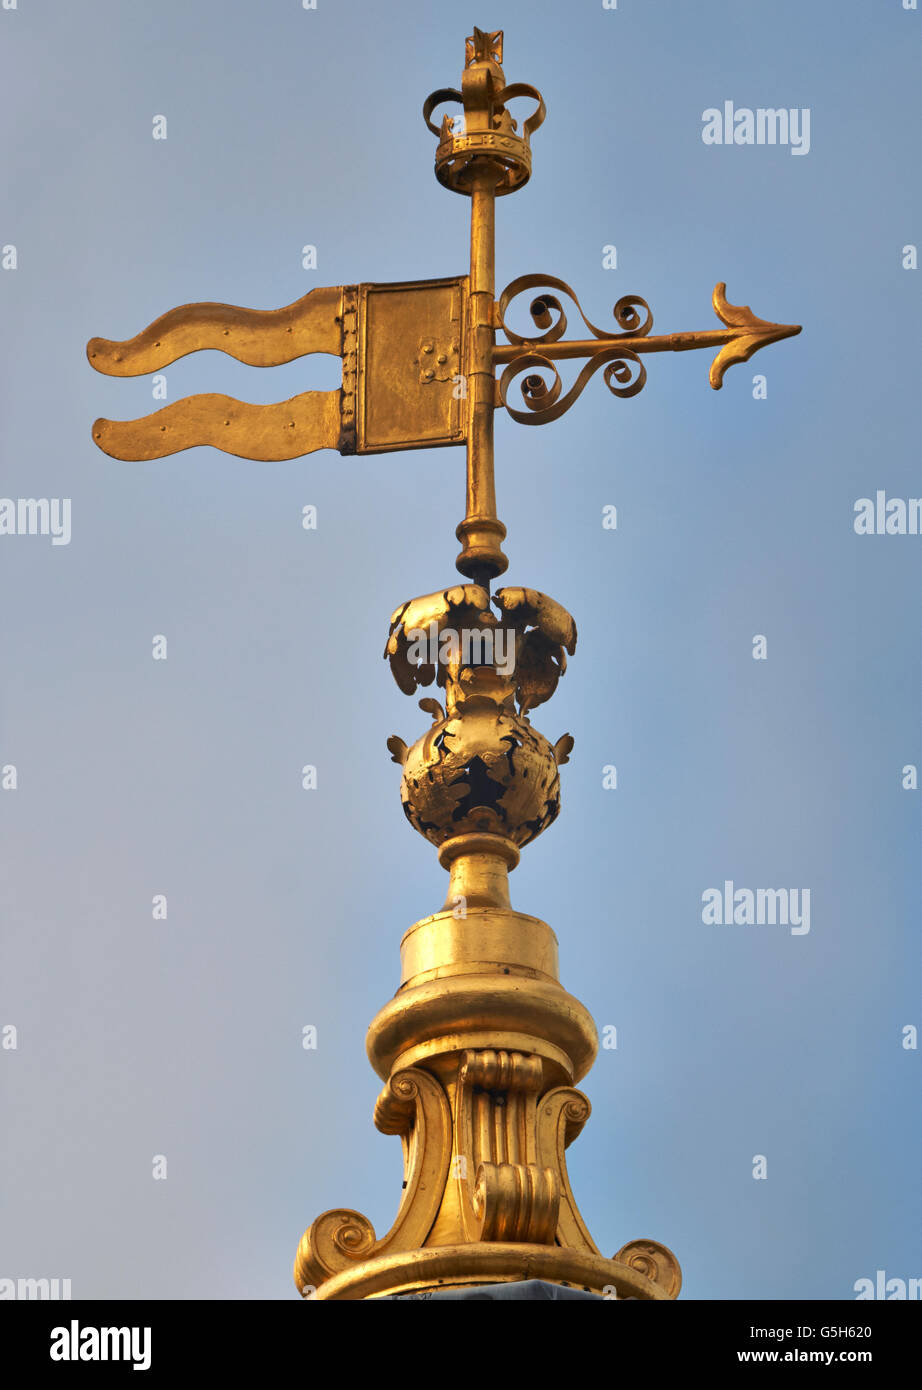 St Edmund King and Martyr, Church in the City of London, weathervane with royal crown. Stock Photo